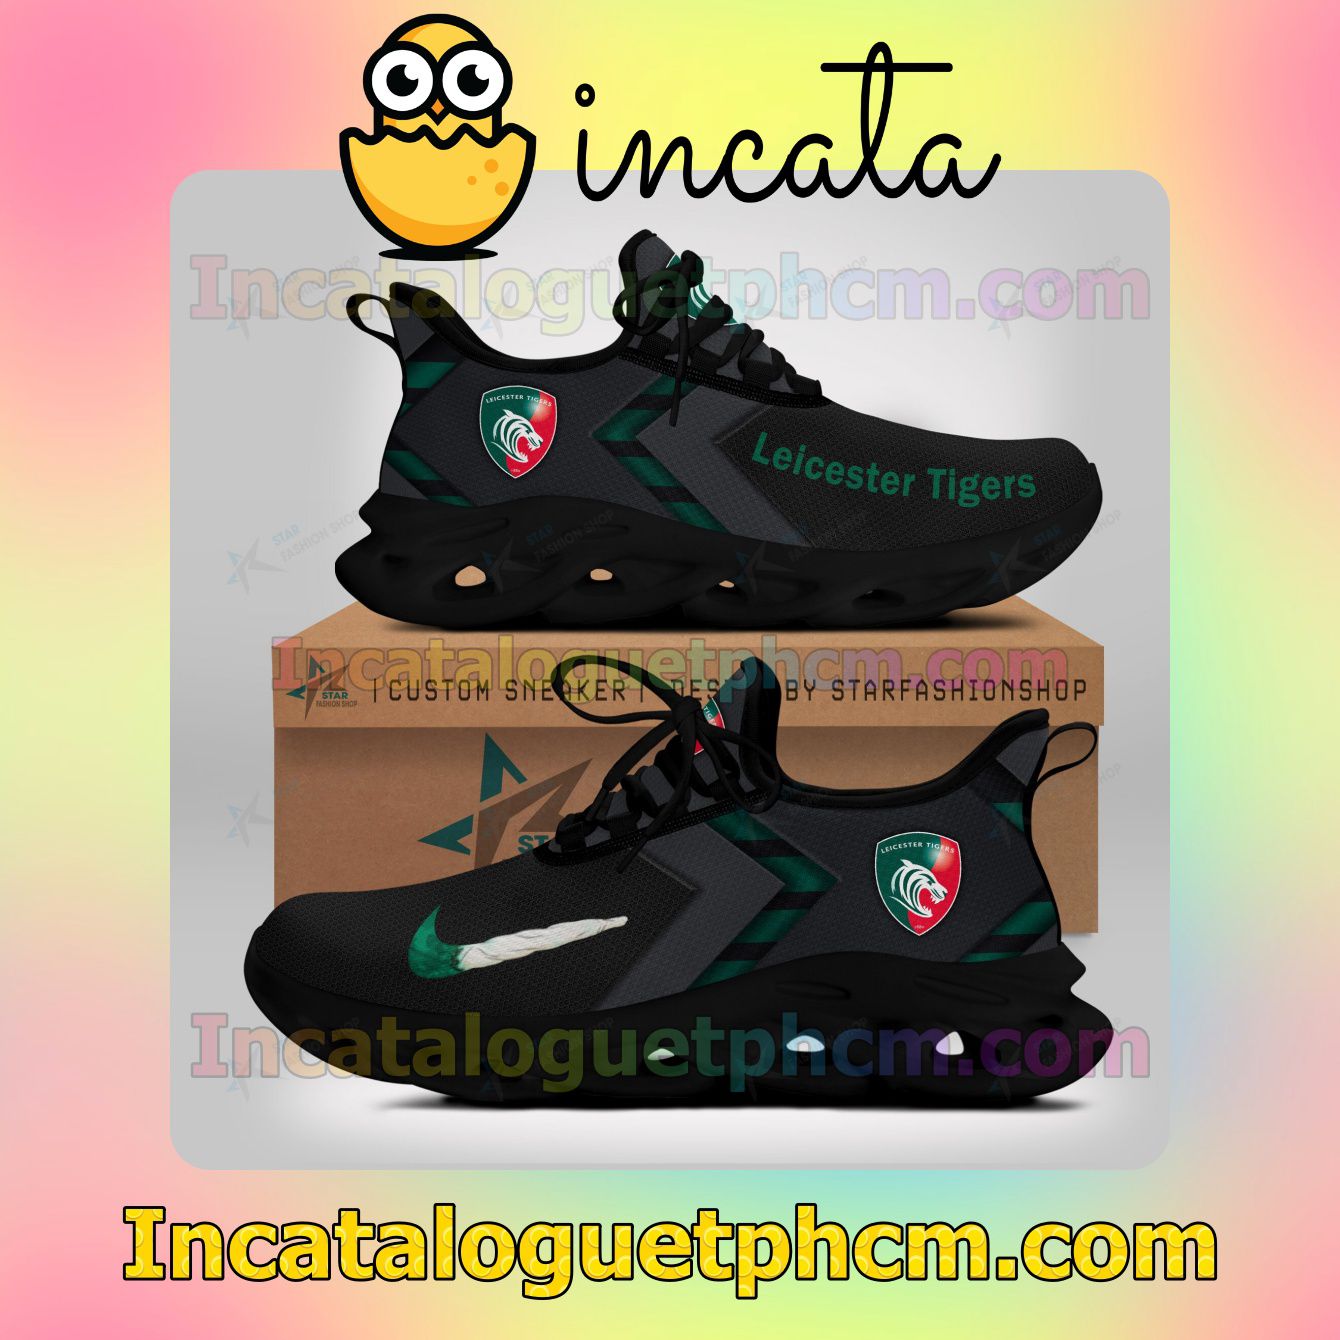 Free Leicester Tigers Women Fashion Sneakers